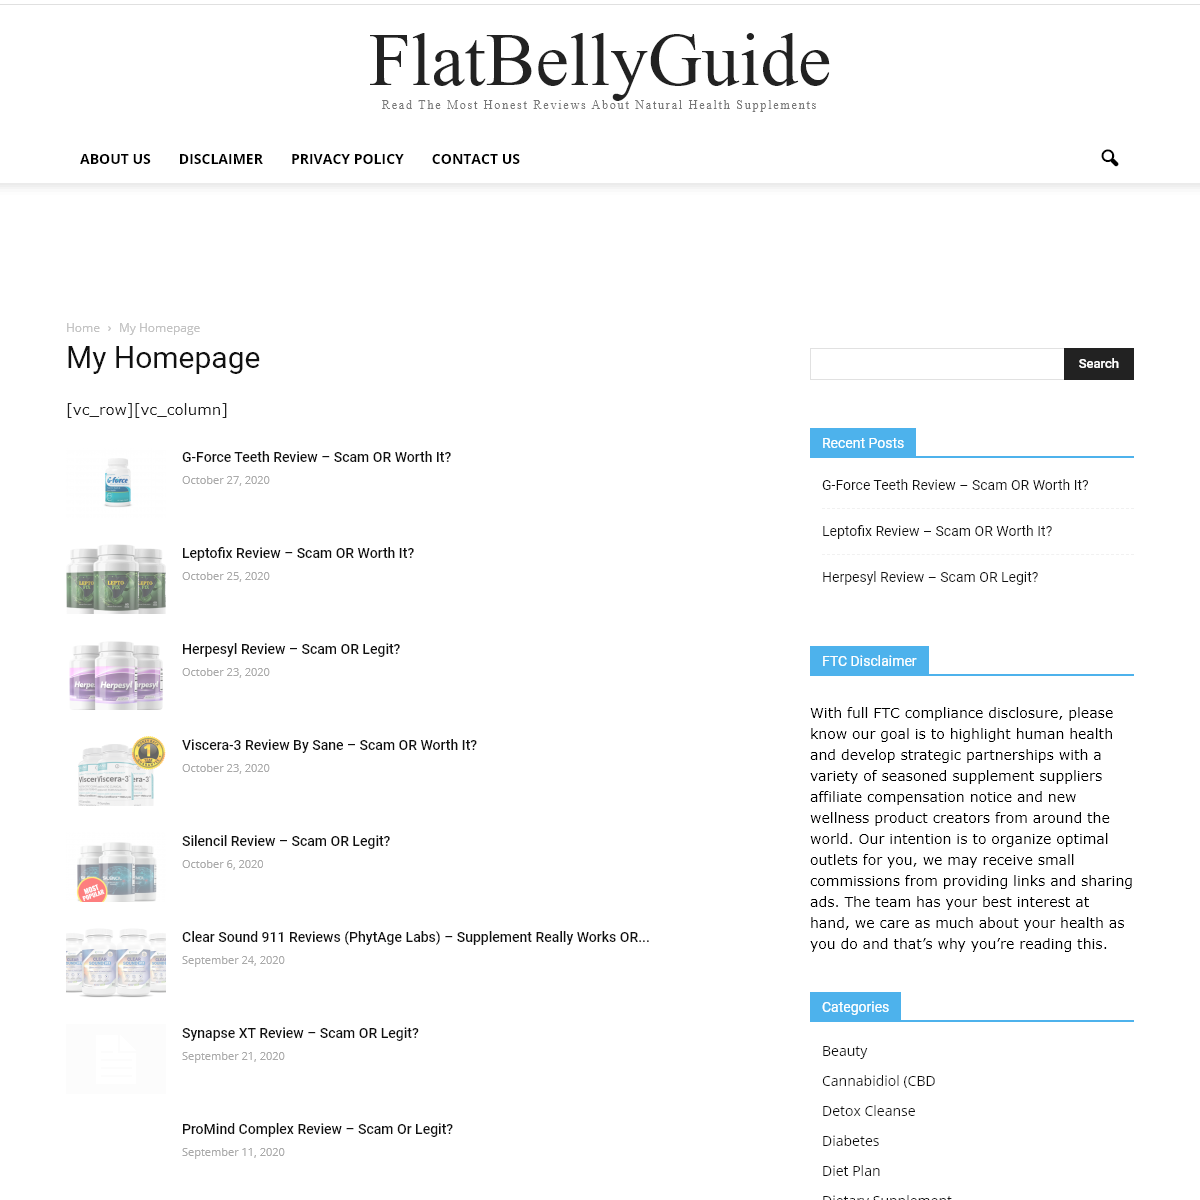 A complete backup of flatbellyguide.co